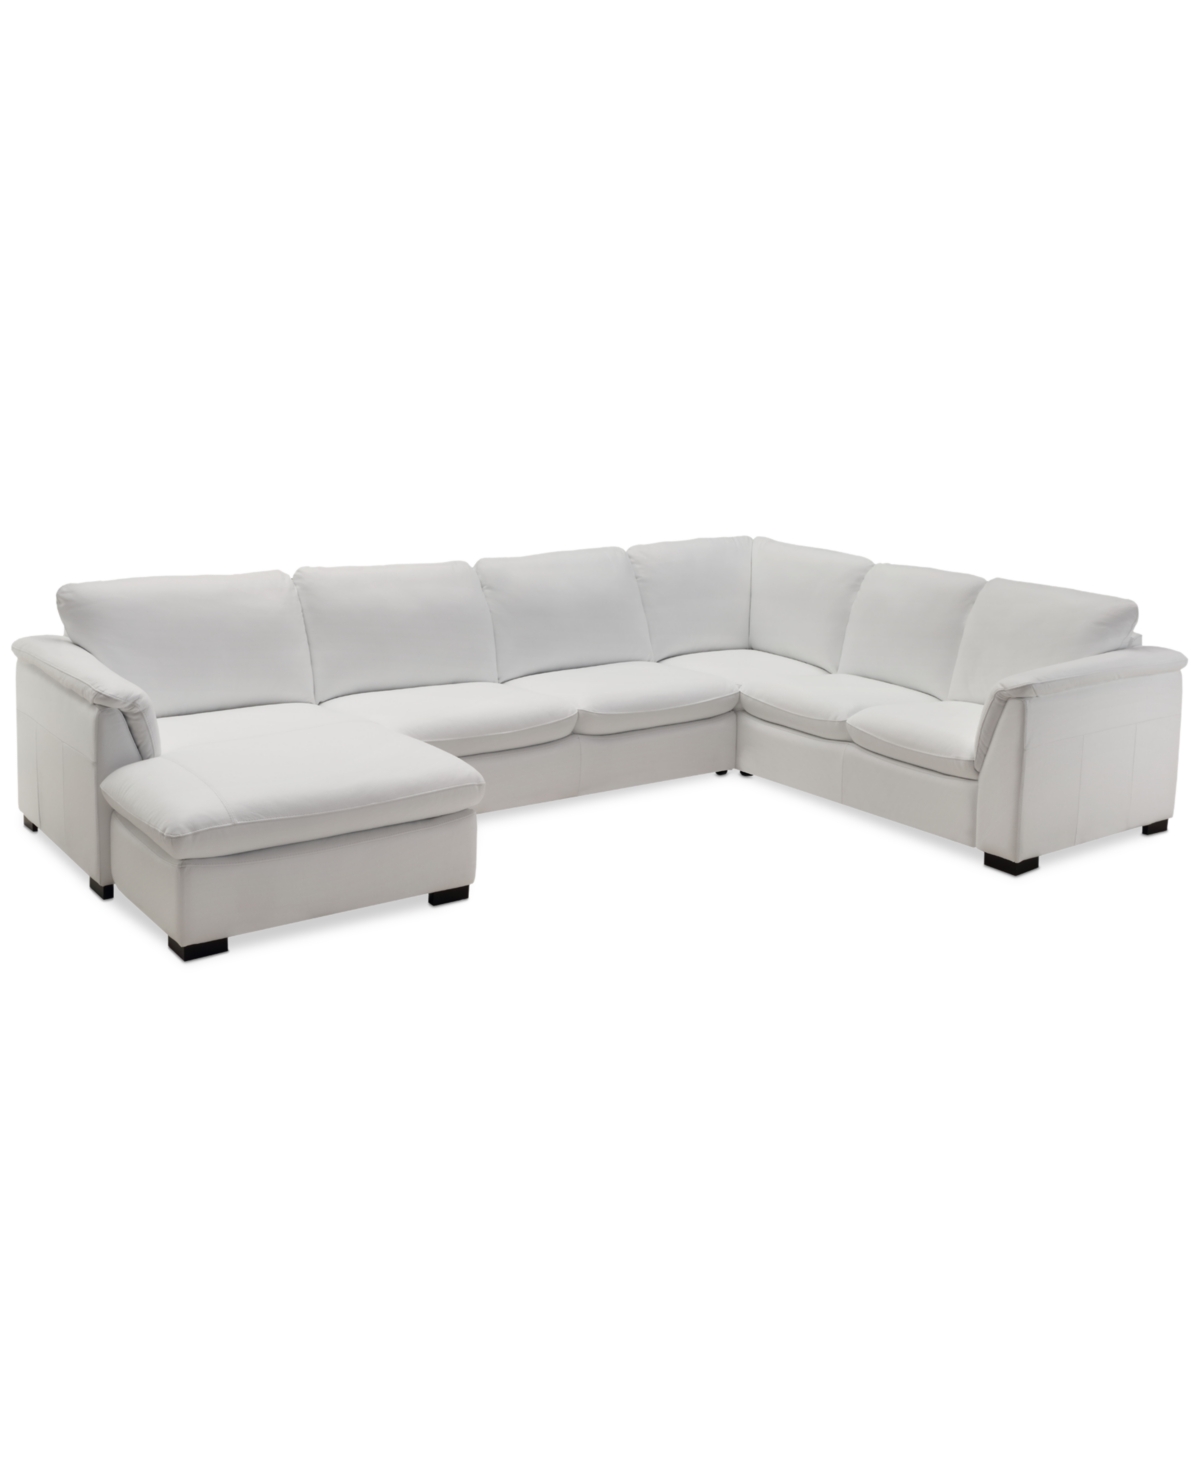 Furniture Arond 144" 3-pc. Leather Sectional With Chaise, Created For Macy's In White